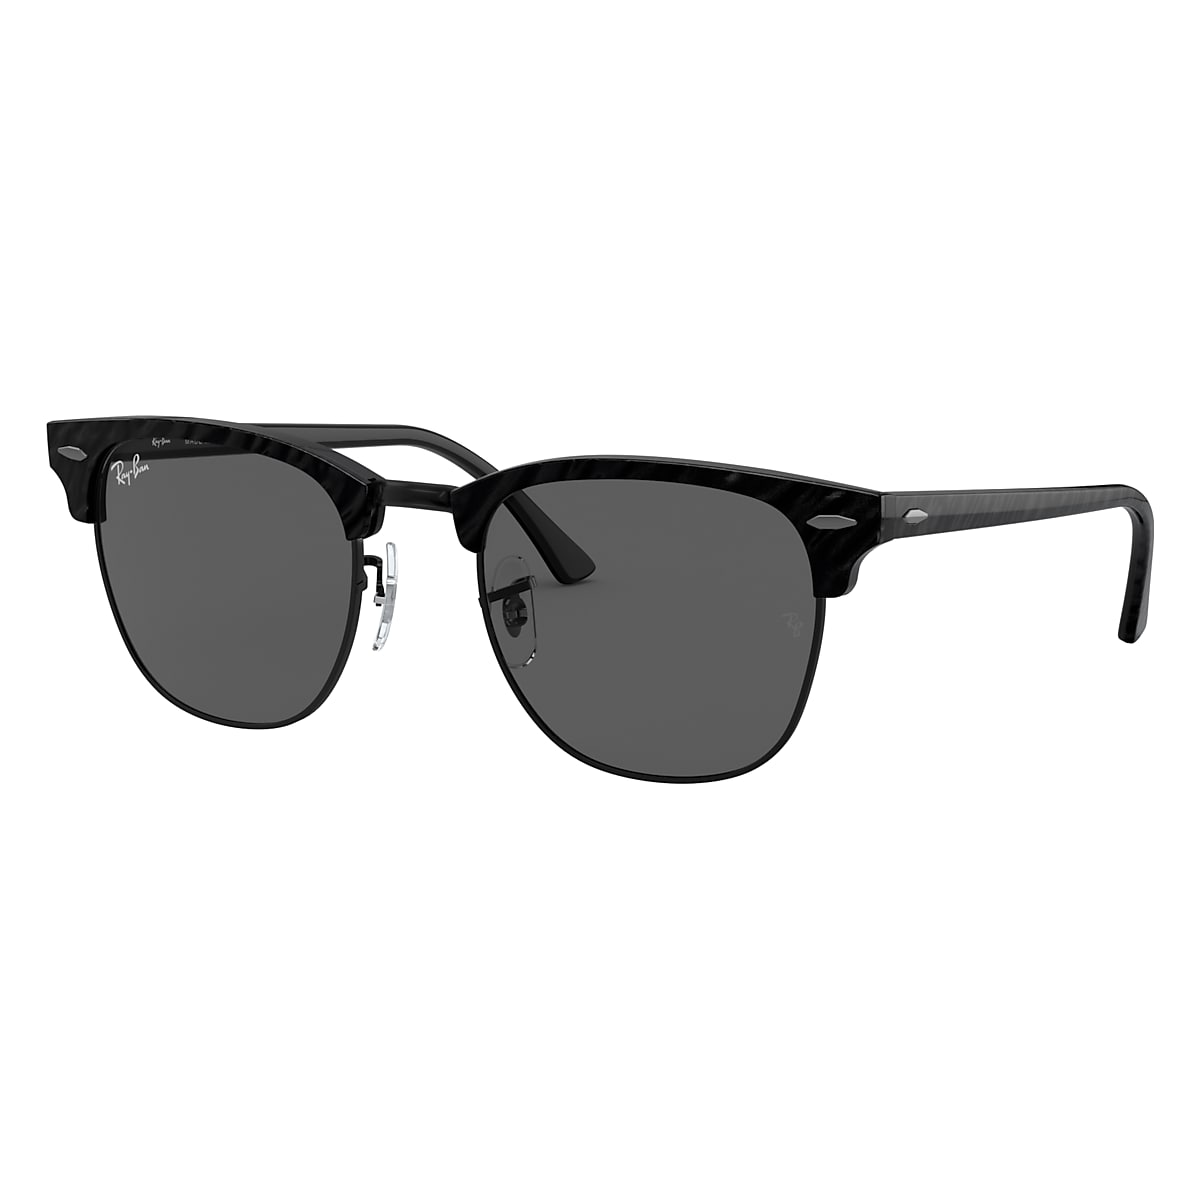 CLUBMASTER MARBLE Sunglasses in Black and Grey - RB3016 | Ray-Ban® US